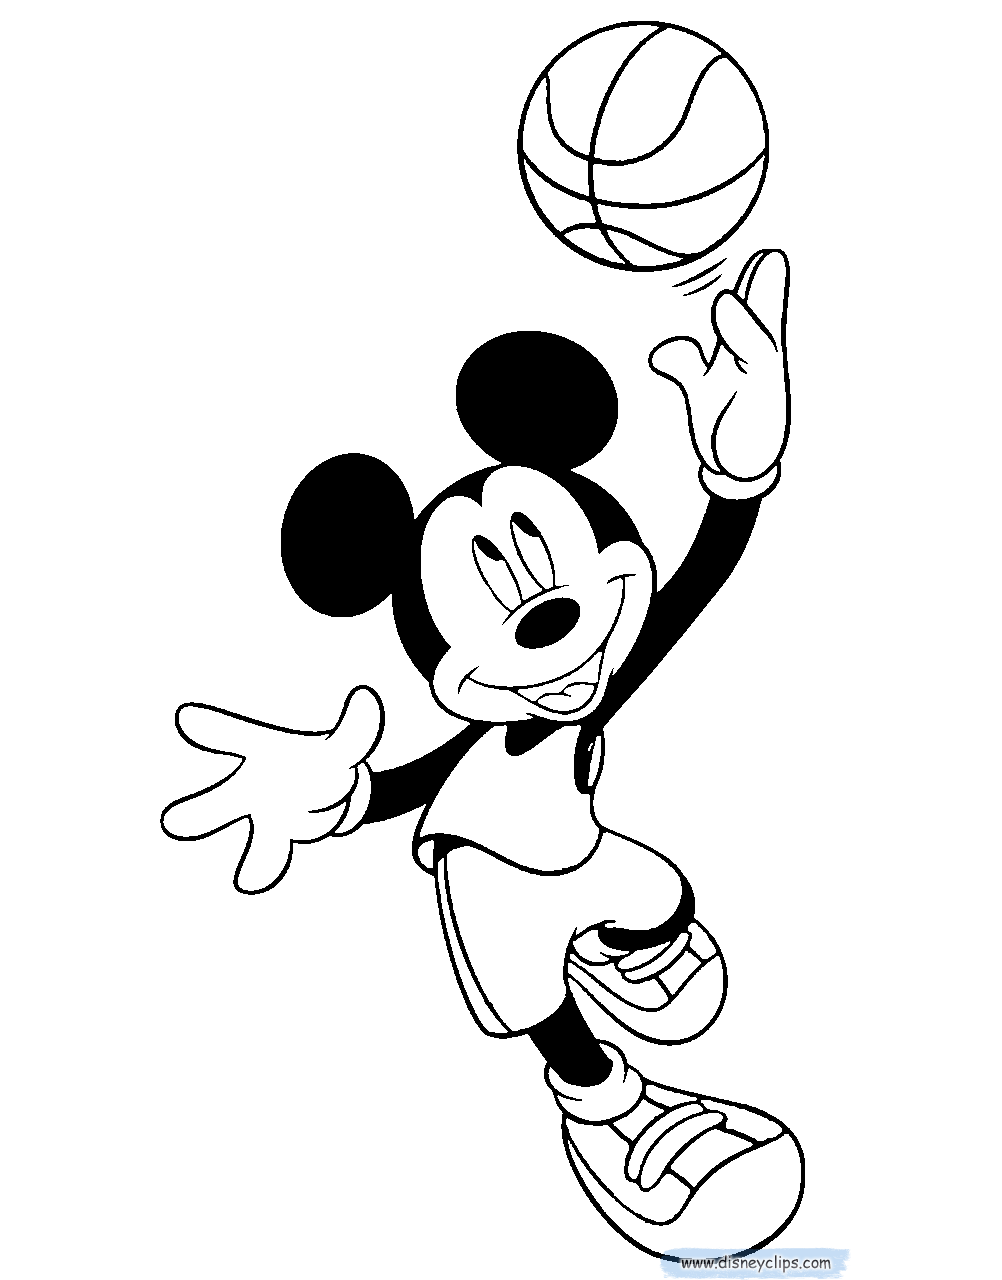 Download Mickey Mouse Coloring Pages 5 | Disney's World of Wonders